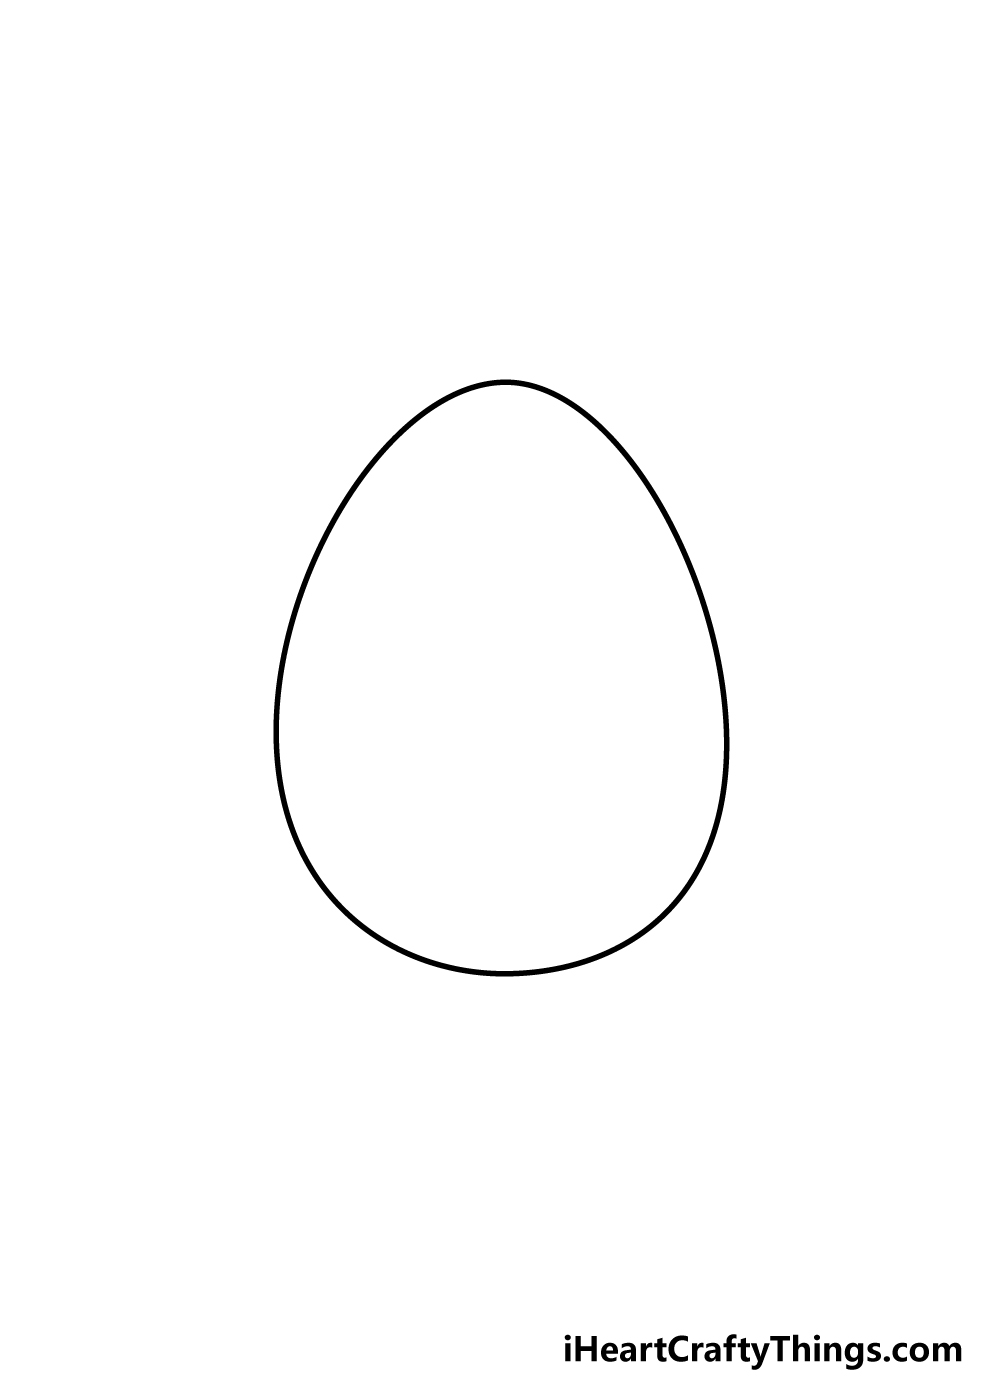 Easter egg drawing step 1